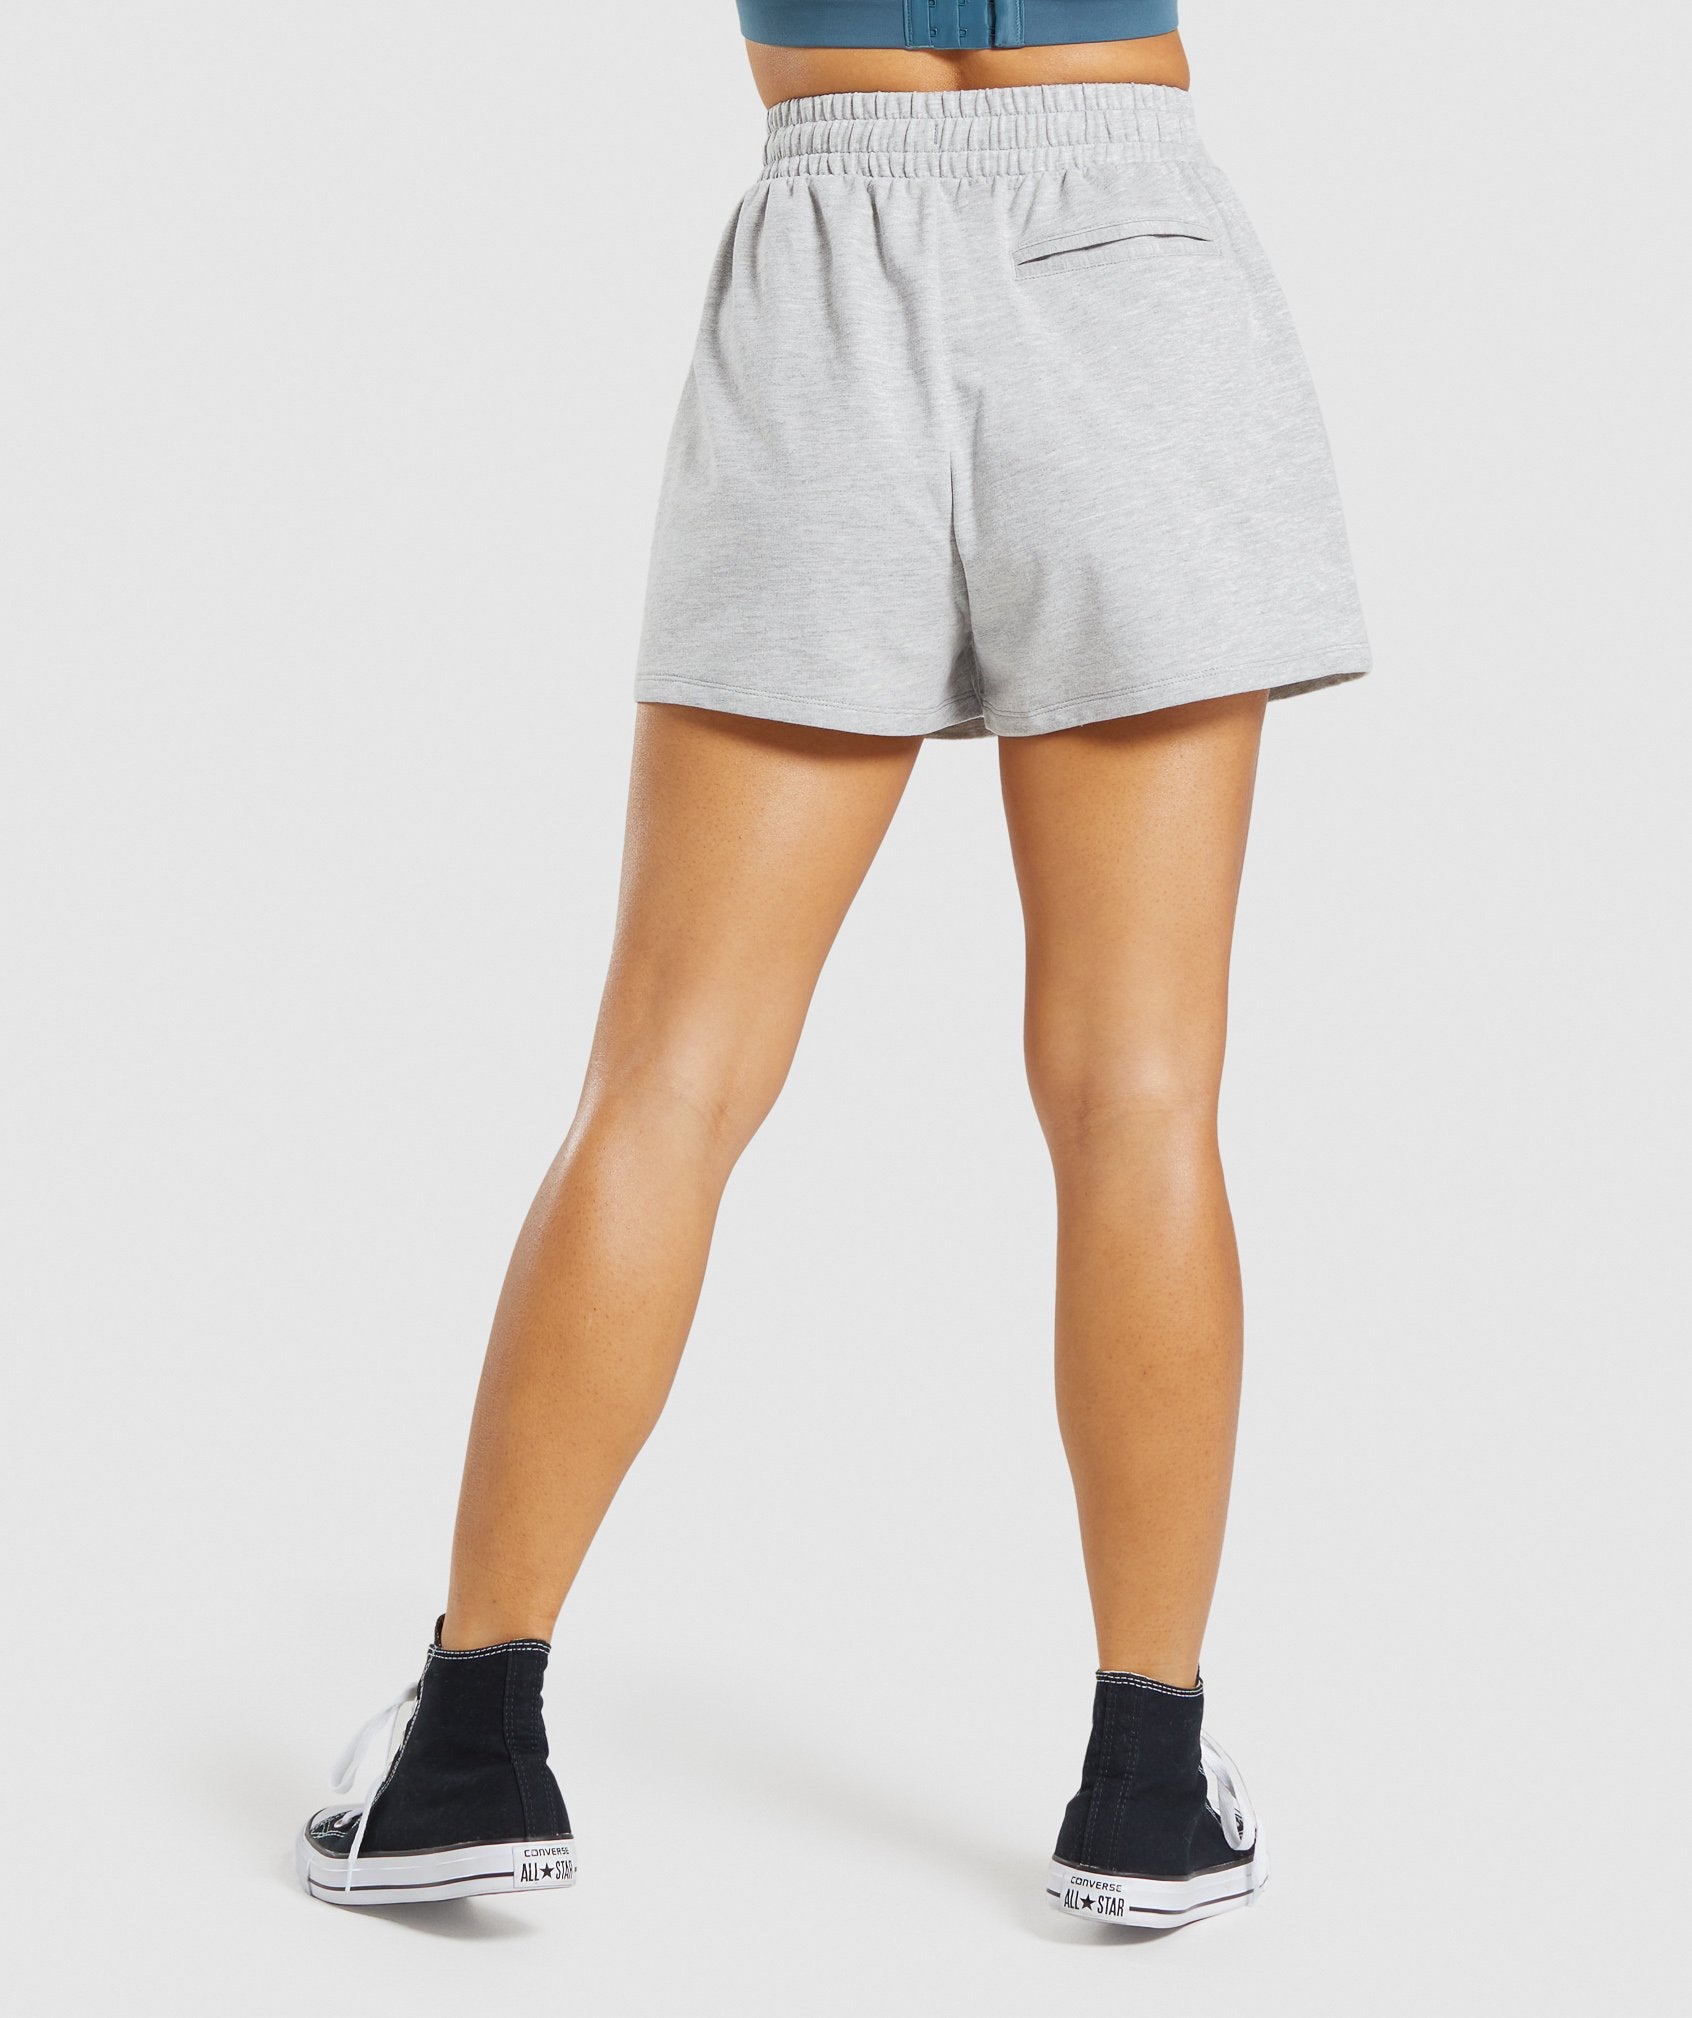 Slim Fit Throw On Shorts in Light Grey Marl - view 2